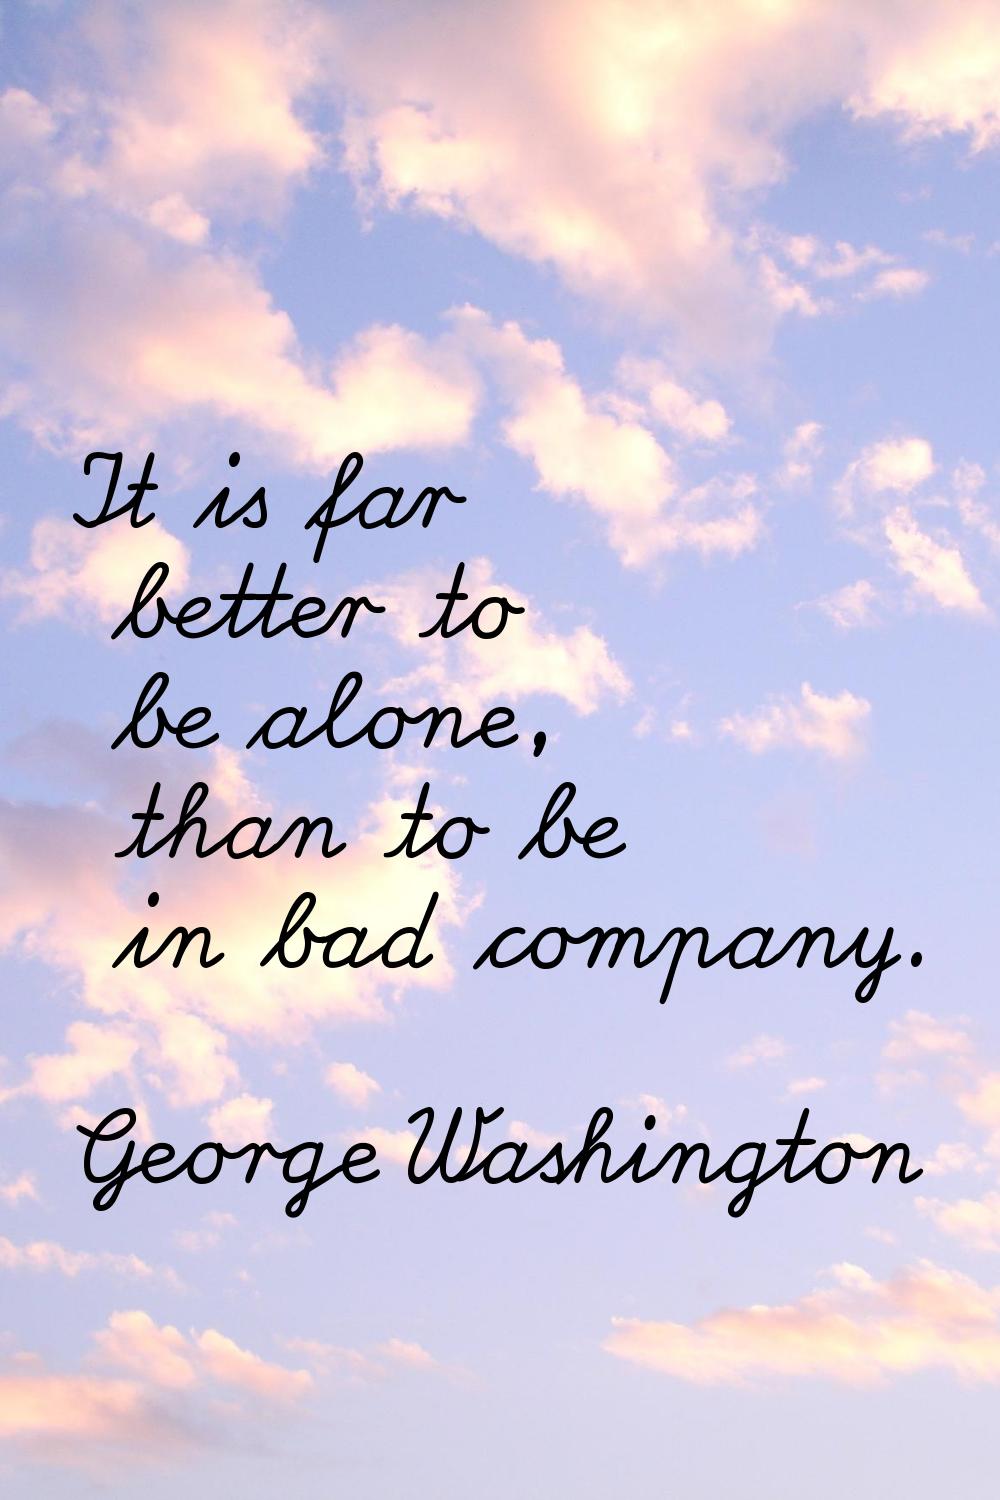 It is far better to be alone, than to be in bad company.